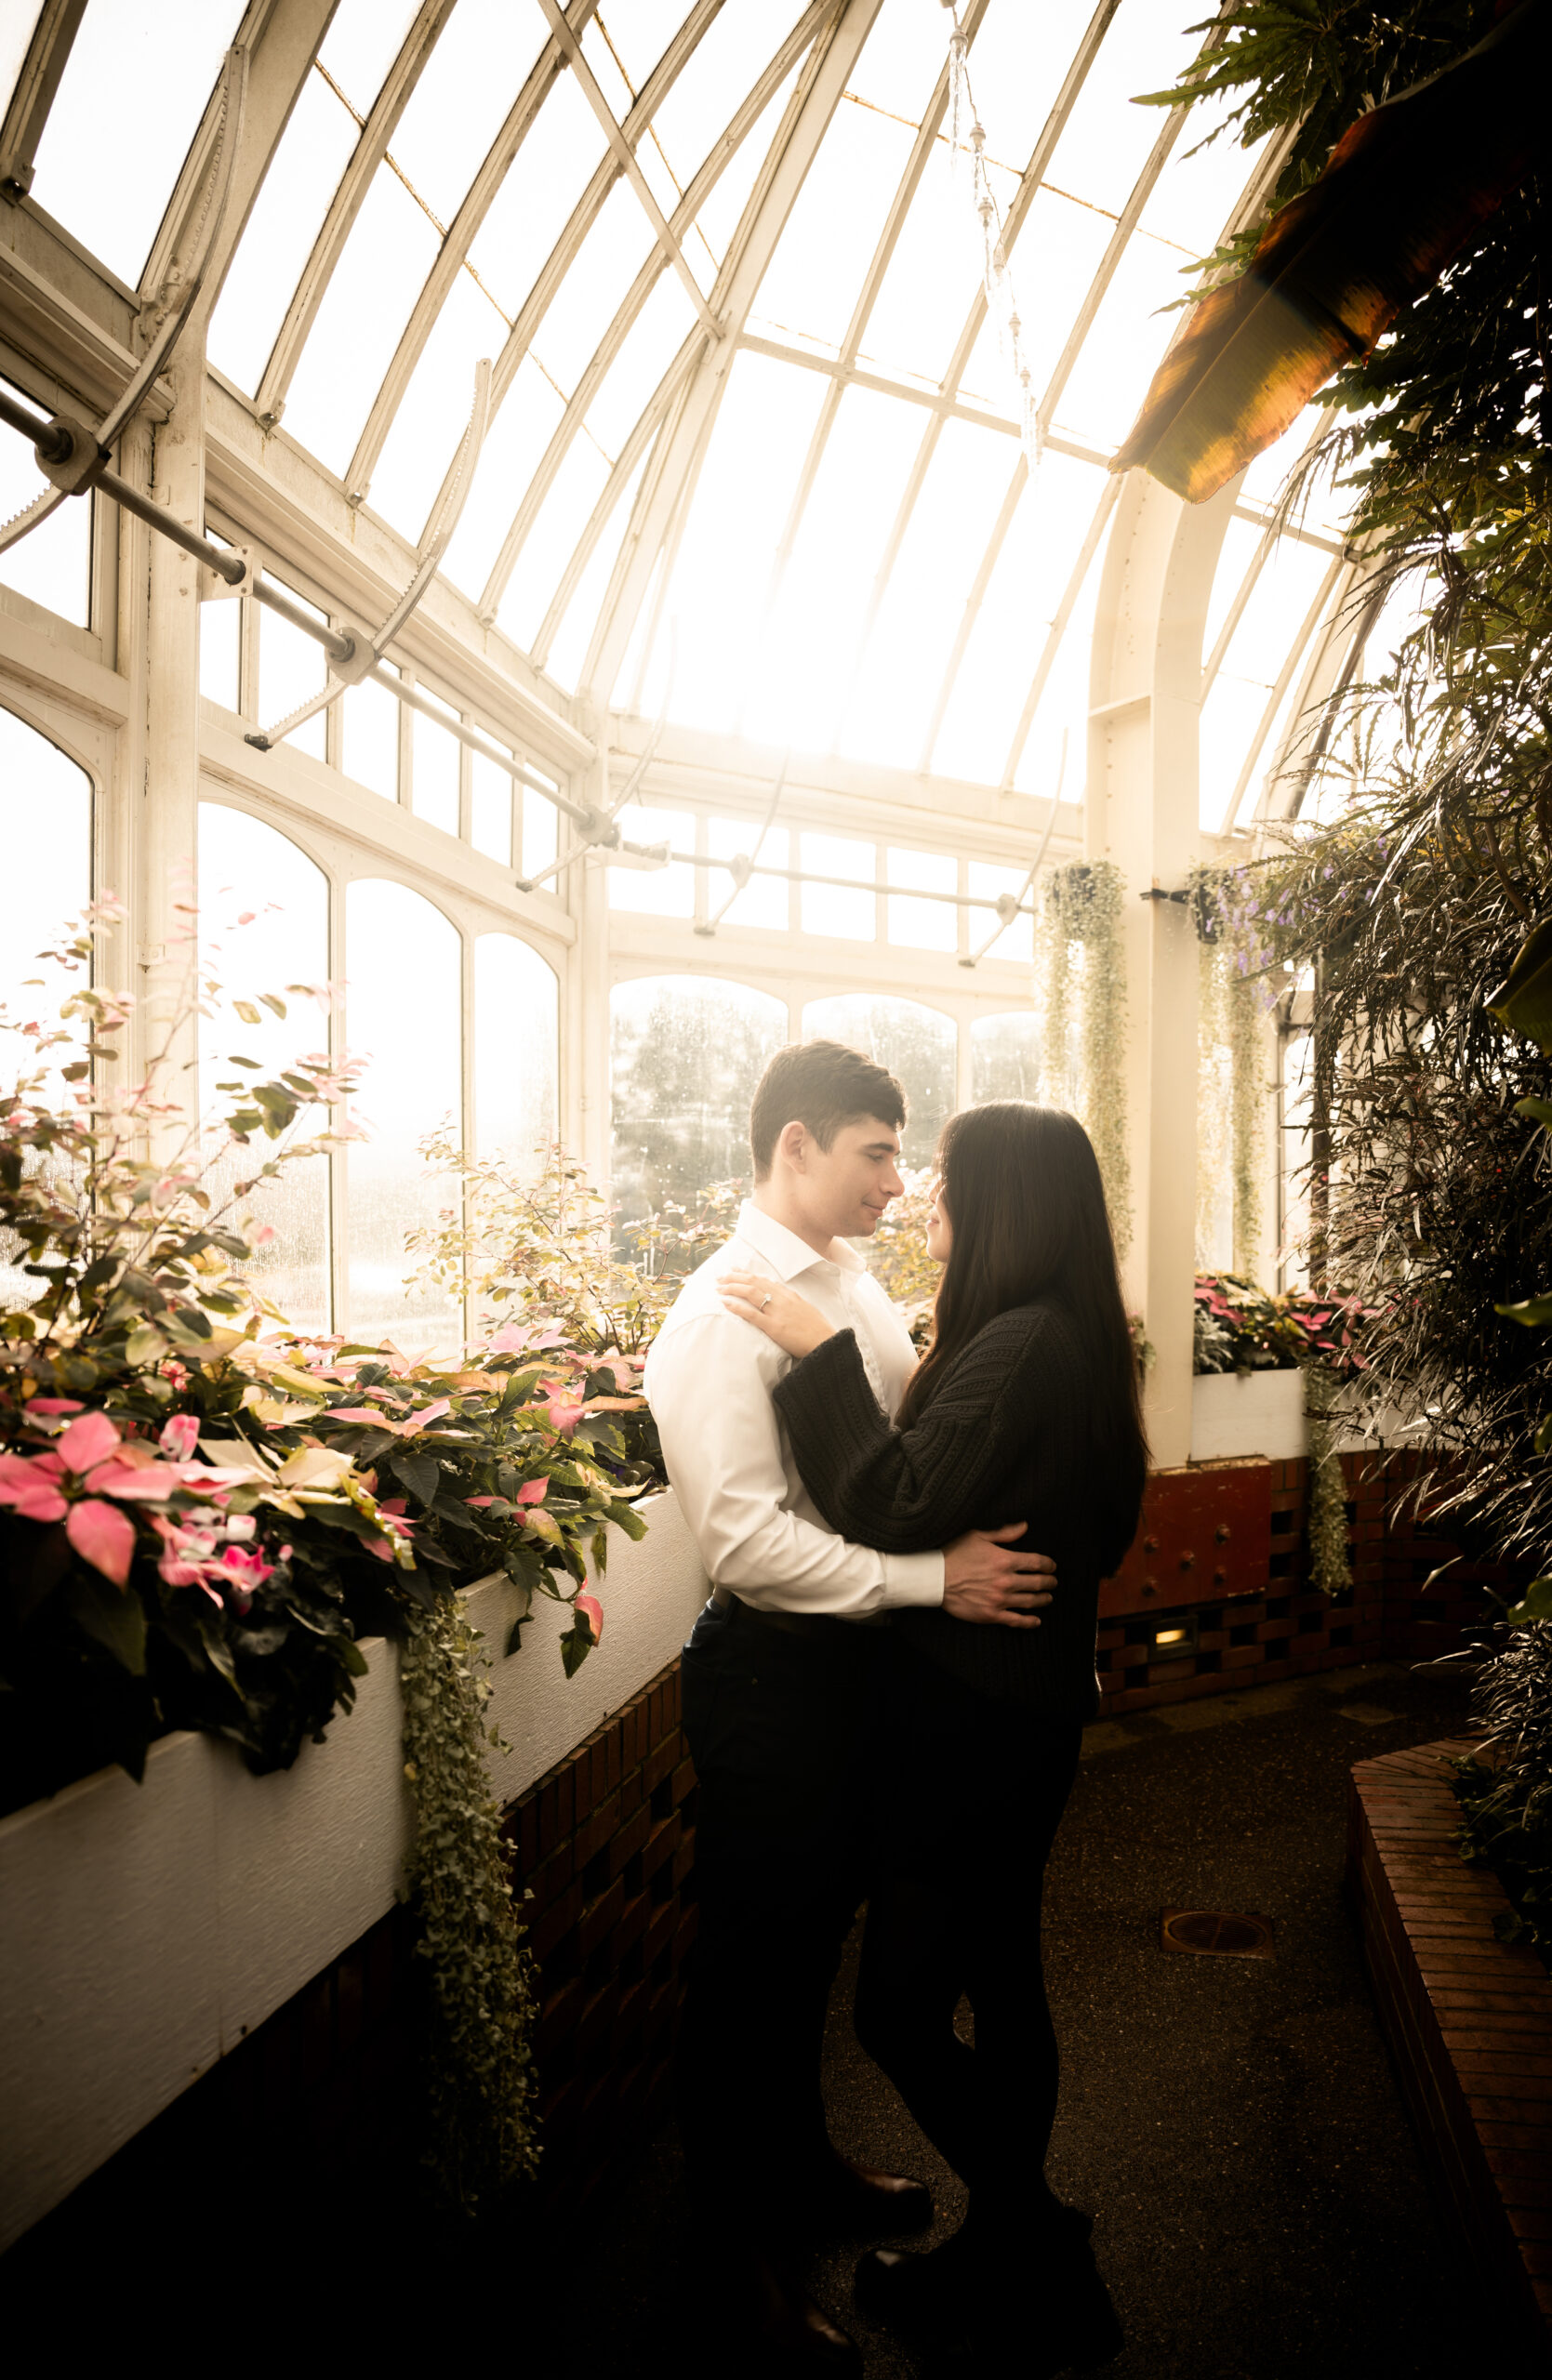 Couple looking at each other at Phipps Conservatory and Botanical Gardens